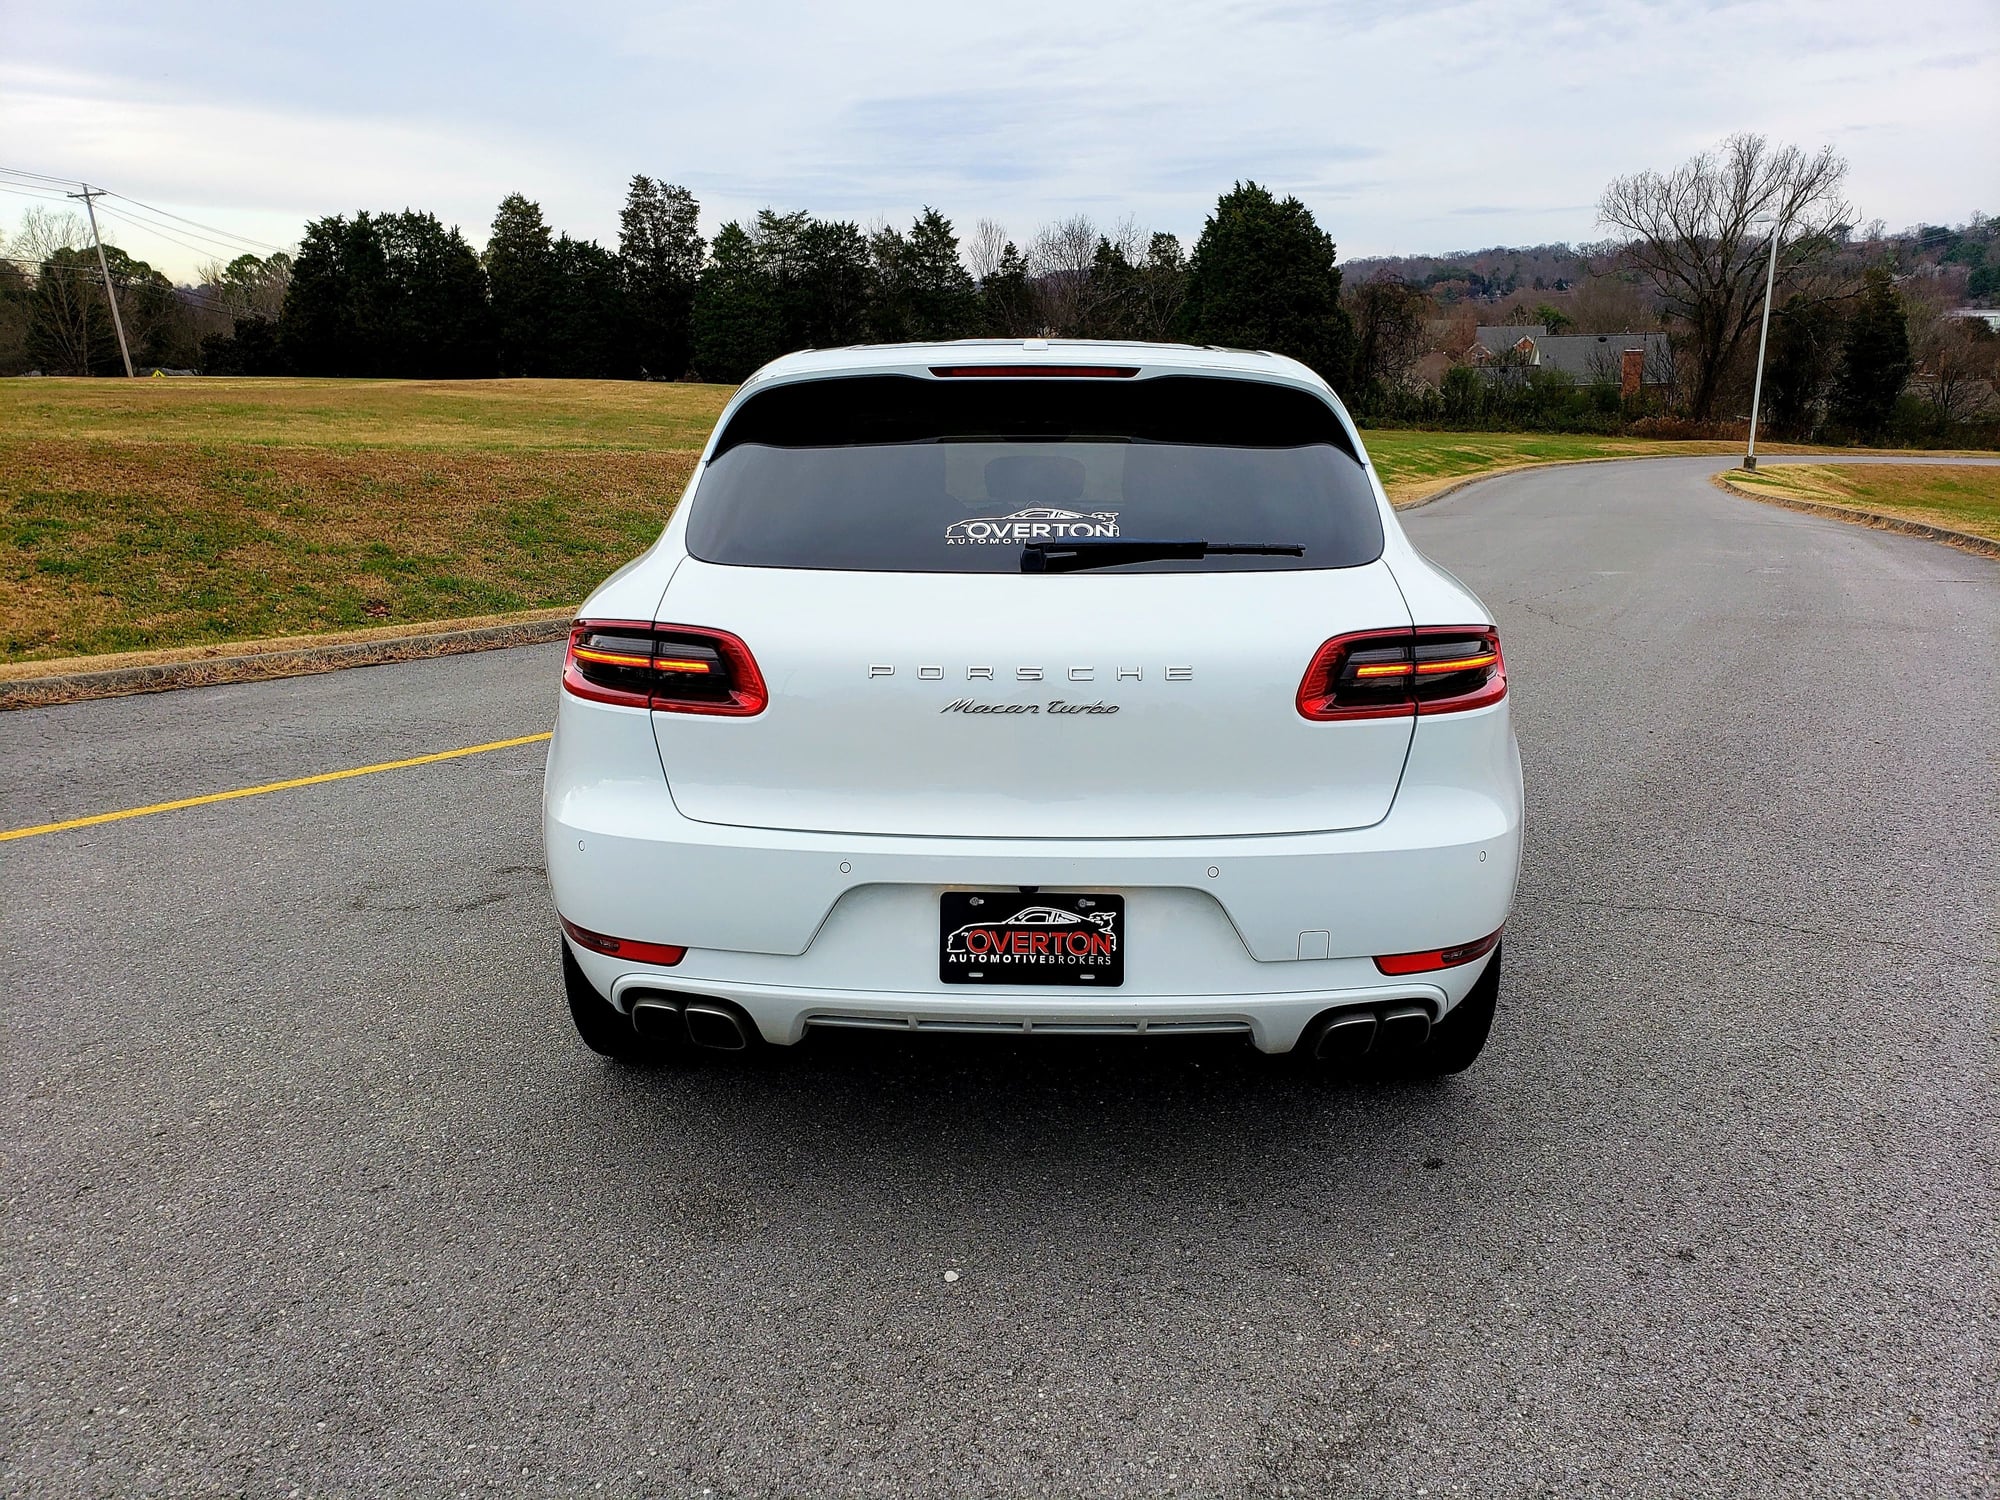 2016 Porsche Macan - 2016 Porsche Macan Turbo Excellent Condition- 1 owner car - Ceramic Coated - Warranty - Used - VIN WP1AF2A51GLB90763 - 38,500 Miles - 6 cyl - AWD - Automatic - SUV - White - Knoxville, TN 37922, United States